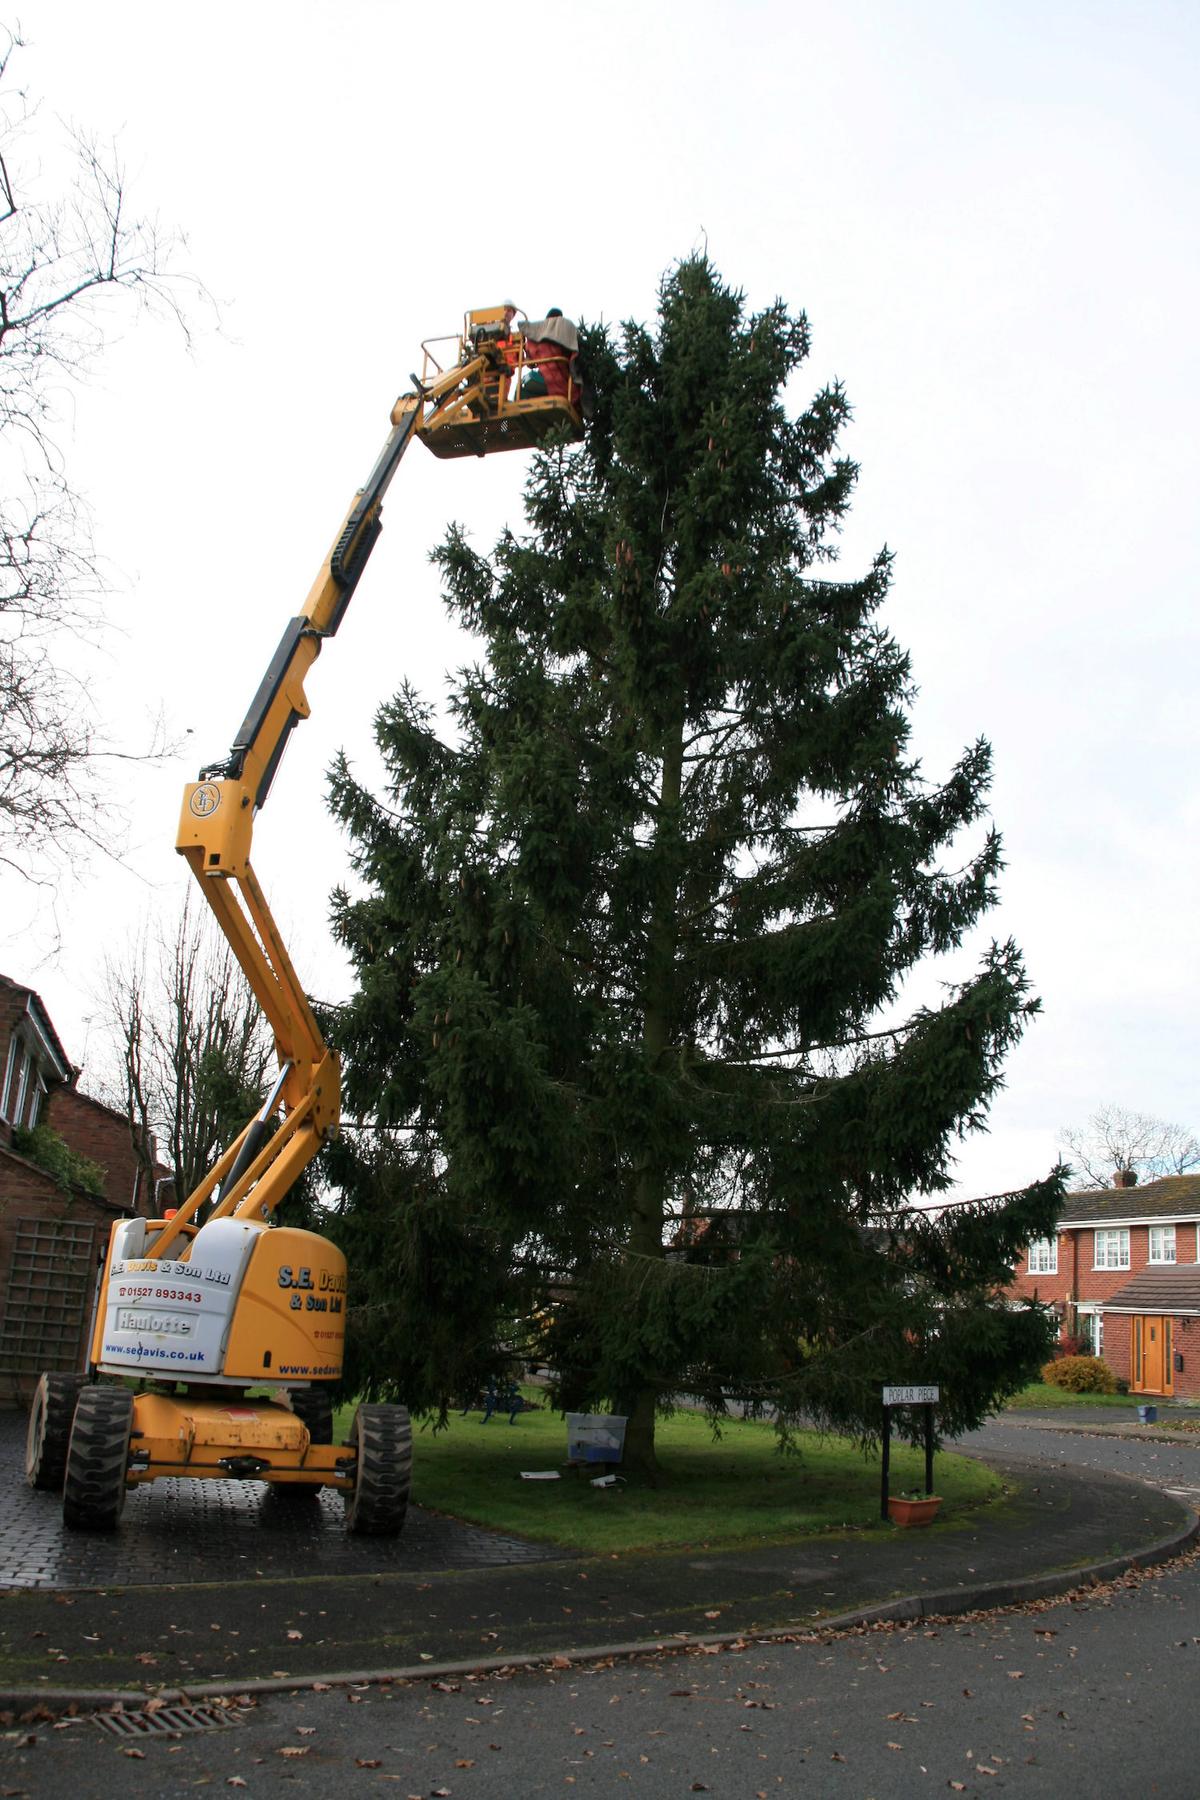 Avril and Christopher Rowlands from Inkberrow in Worcestershire decorate their giant Christmas tree using a cherry picker in 2013. (SWNS)